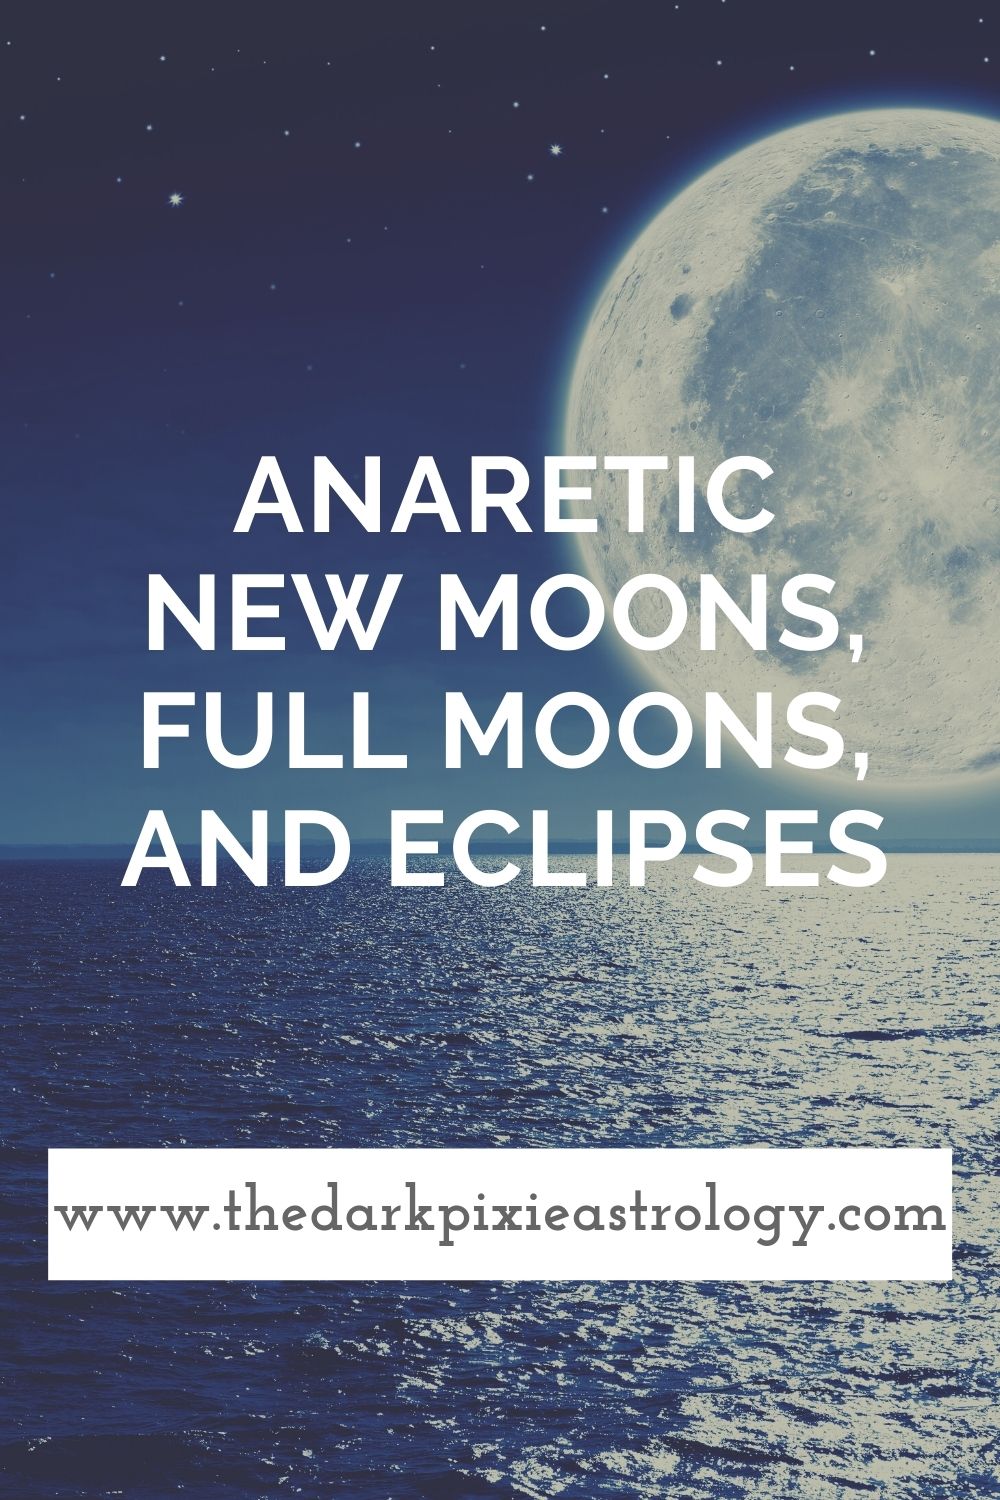 Anaretic New Moons, Full Moons, and Eclipses - The Dark Pixie Astrology